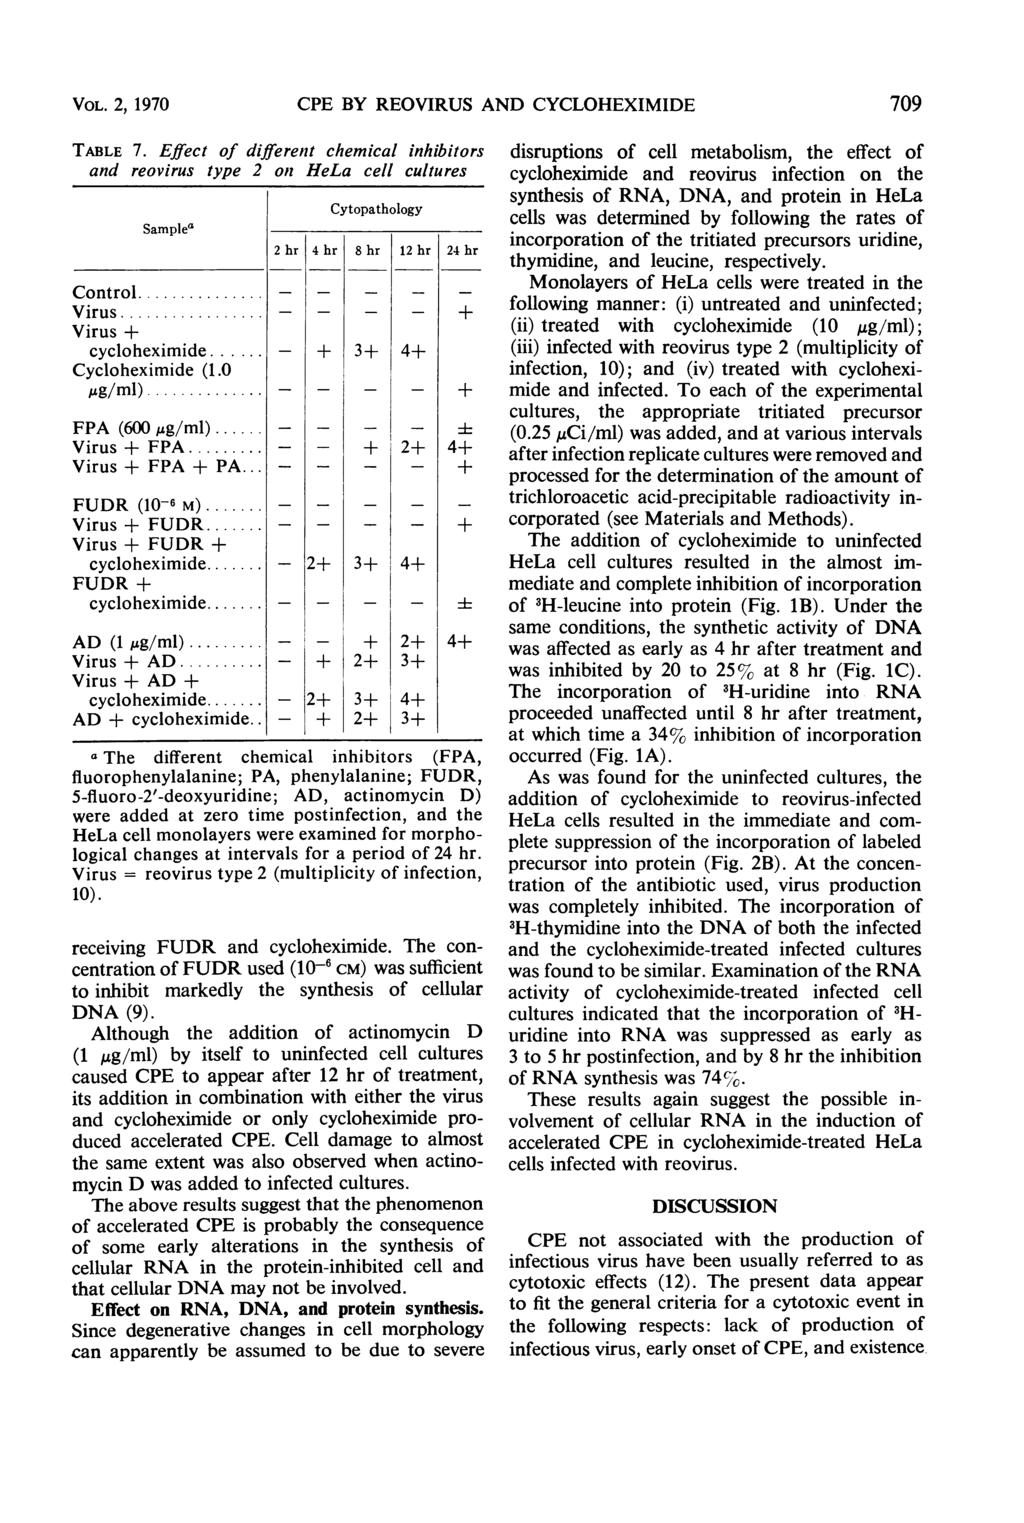 VOL., 197 CPE BY REOVIRUS AND CYCLOHEXIMIDE 79 TABLE 7. Effect of different chemical inhibitors and reovirus type on HeLa cell cultures Cytopathology Sample' - 1 Control... - - Virus.